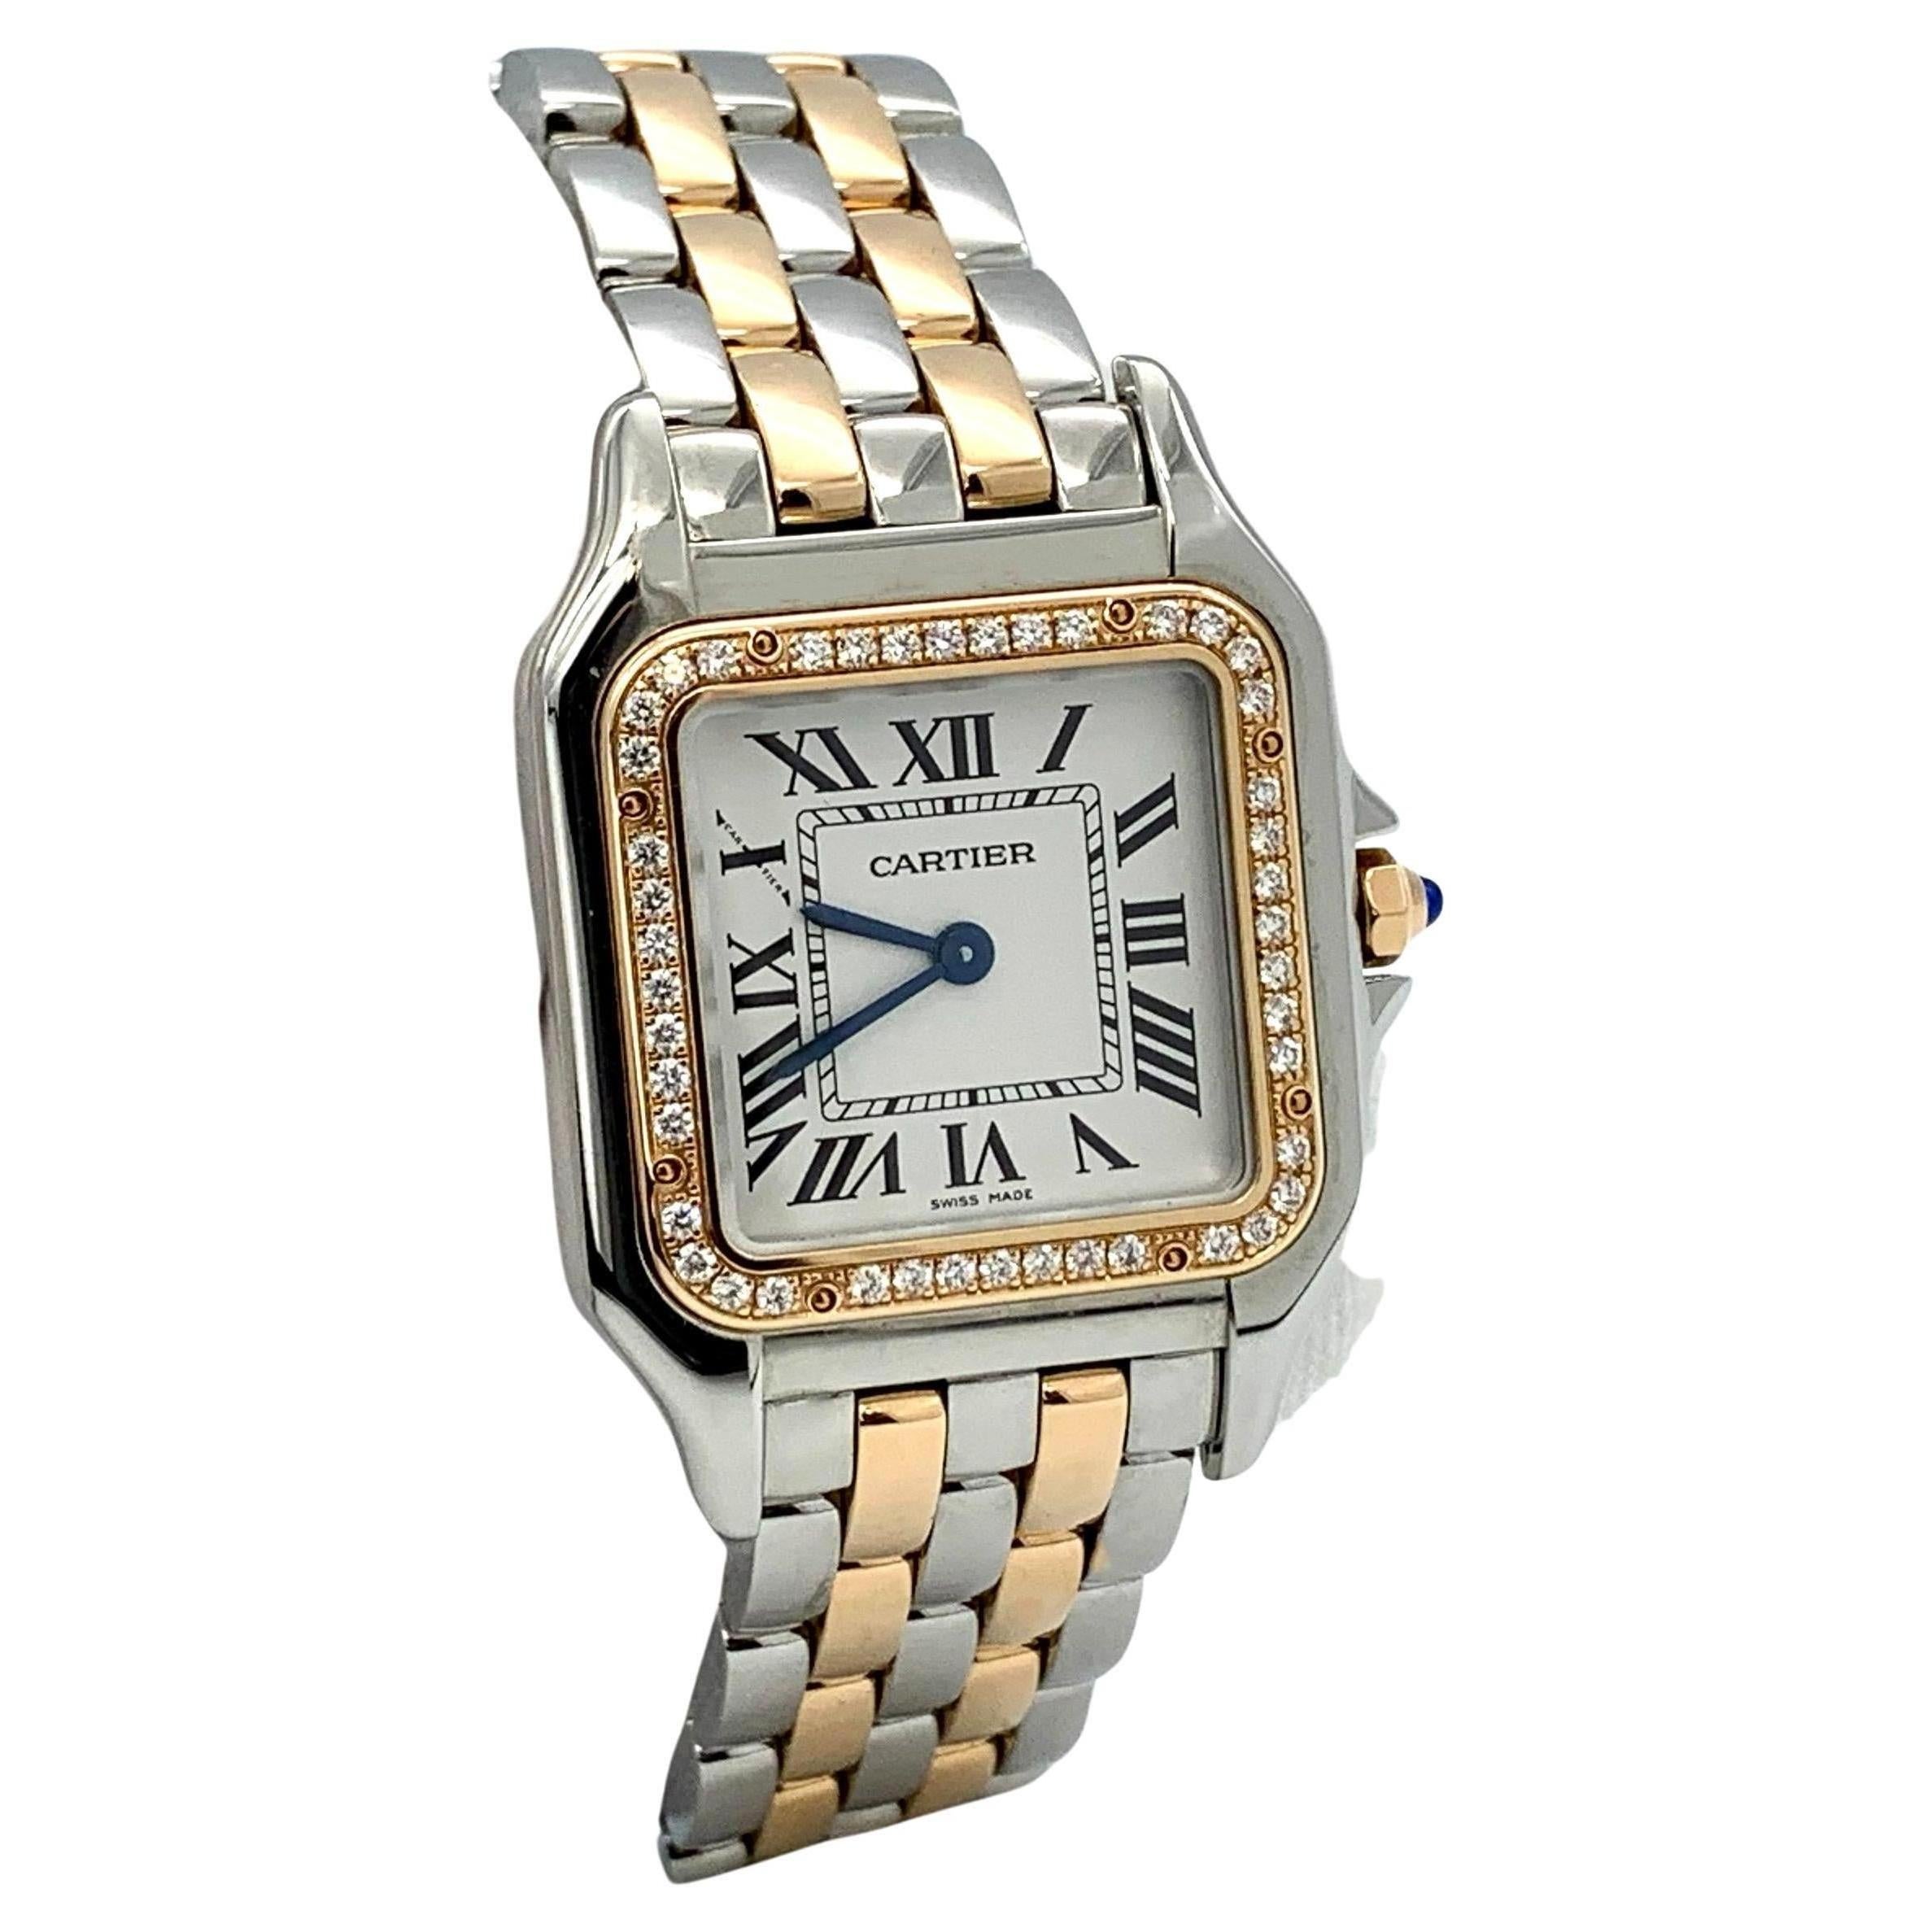 When was the Cartier Panthere watch discontinued?